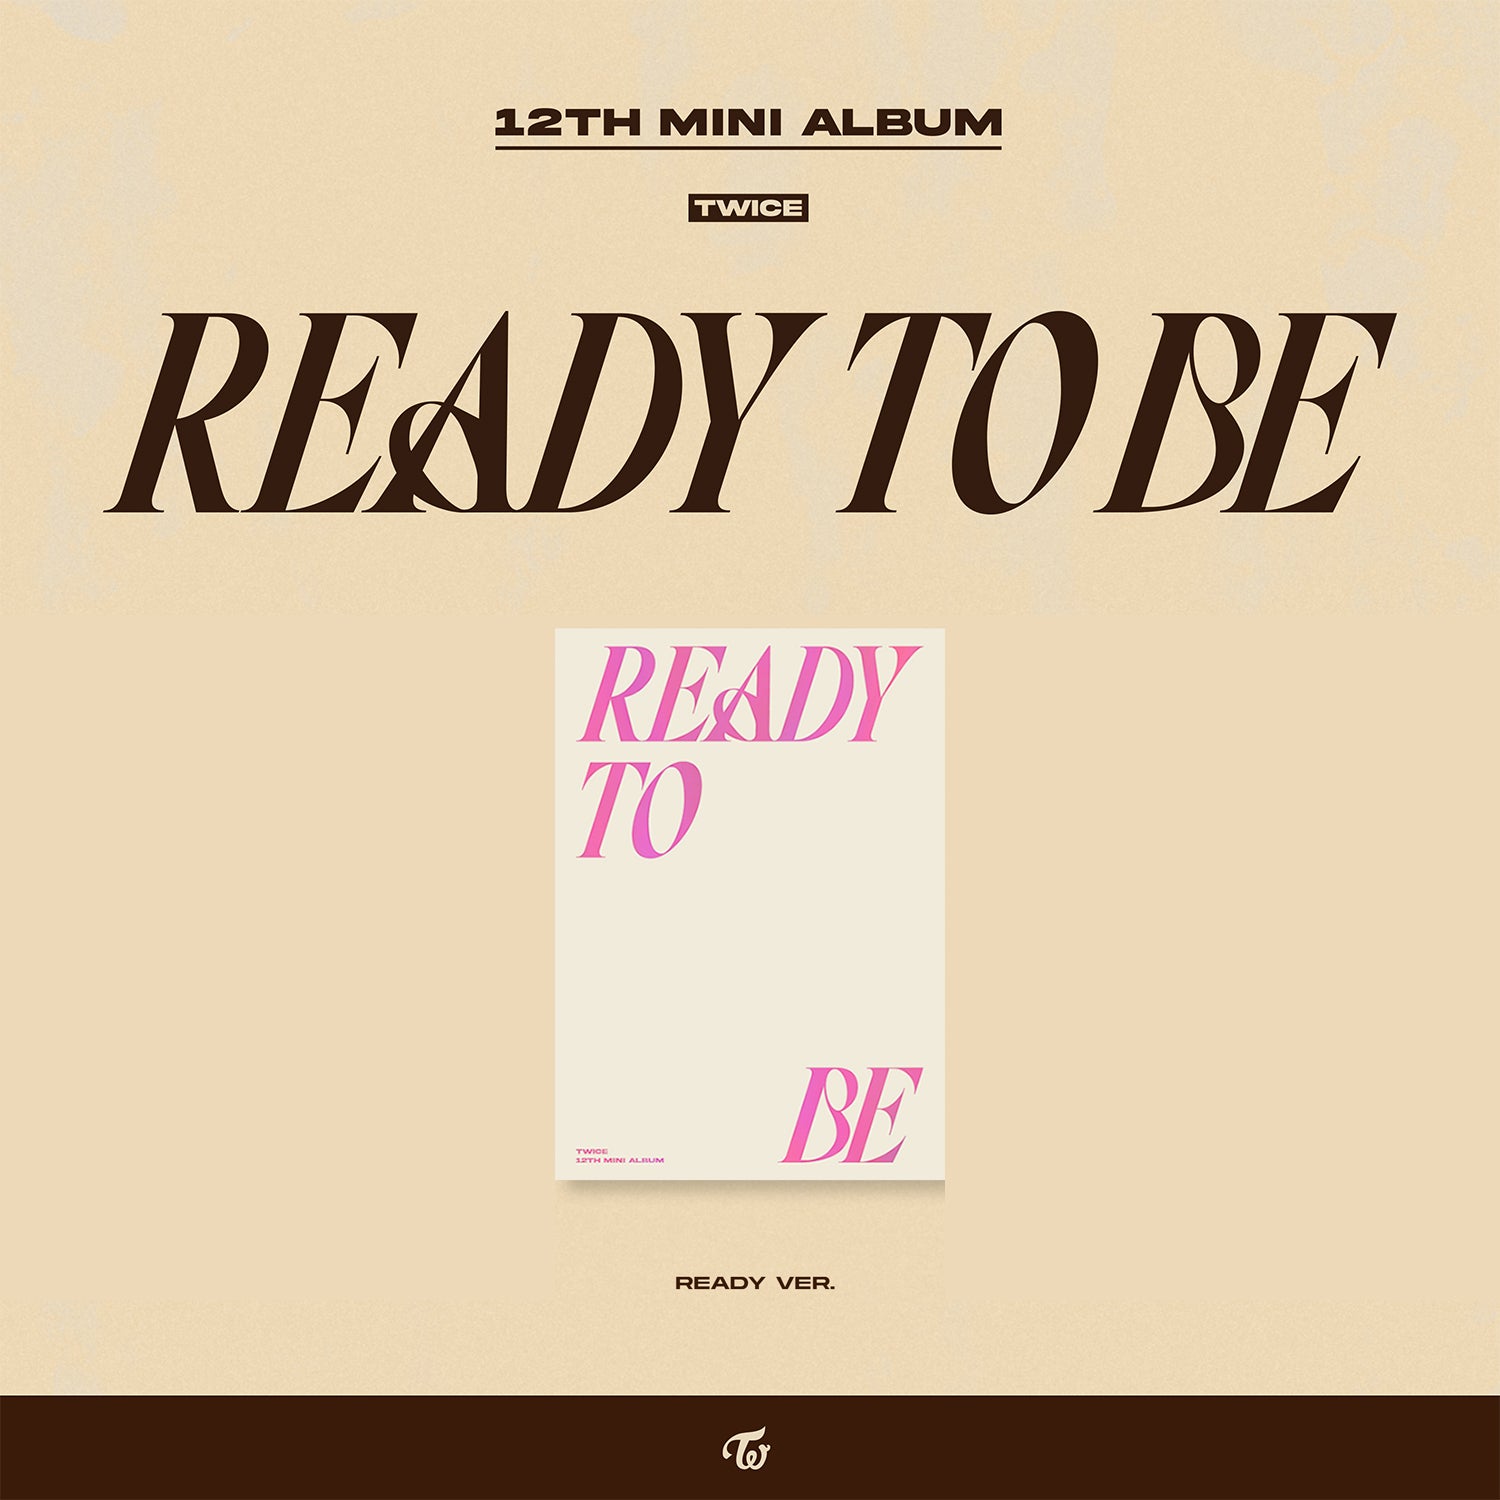 TWICE 12TH MINI ALBUM 'READY TO BE' READY VERSION COVER